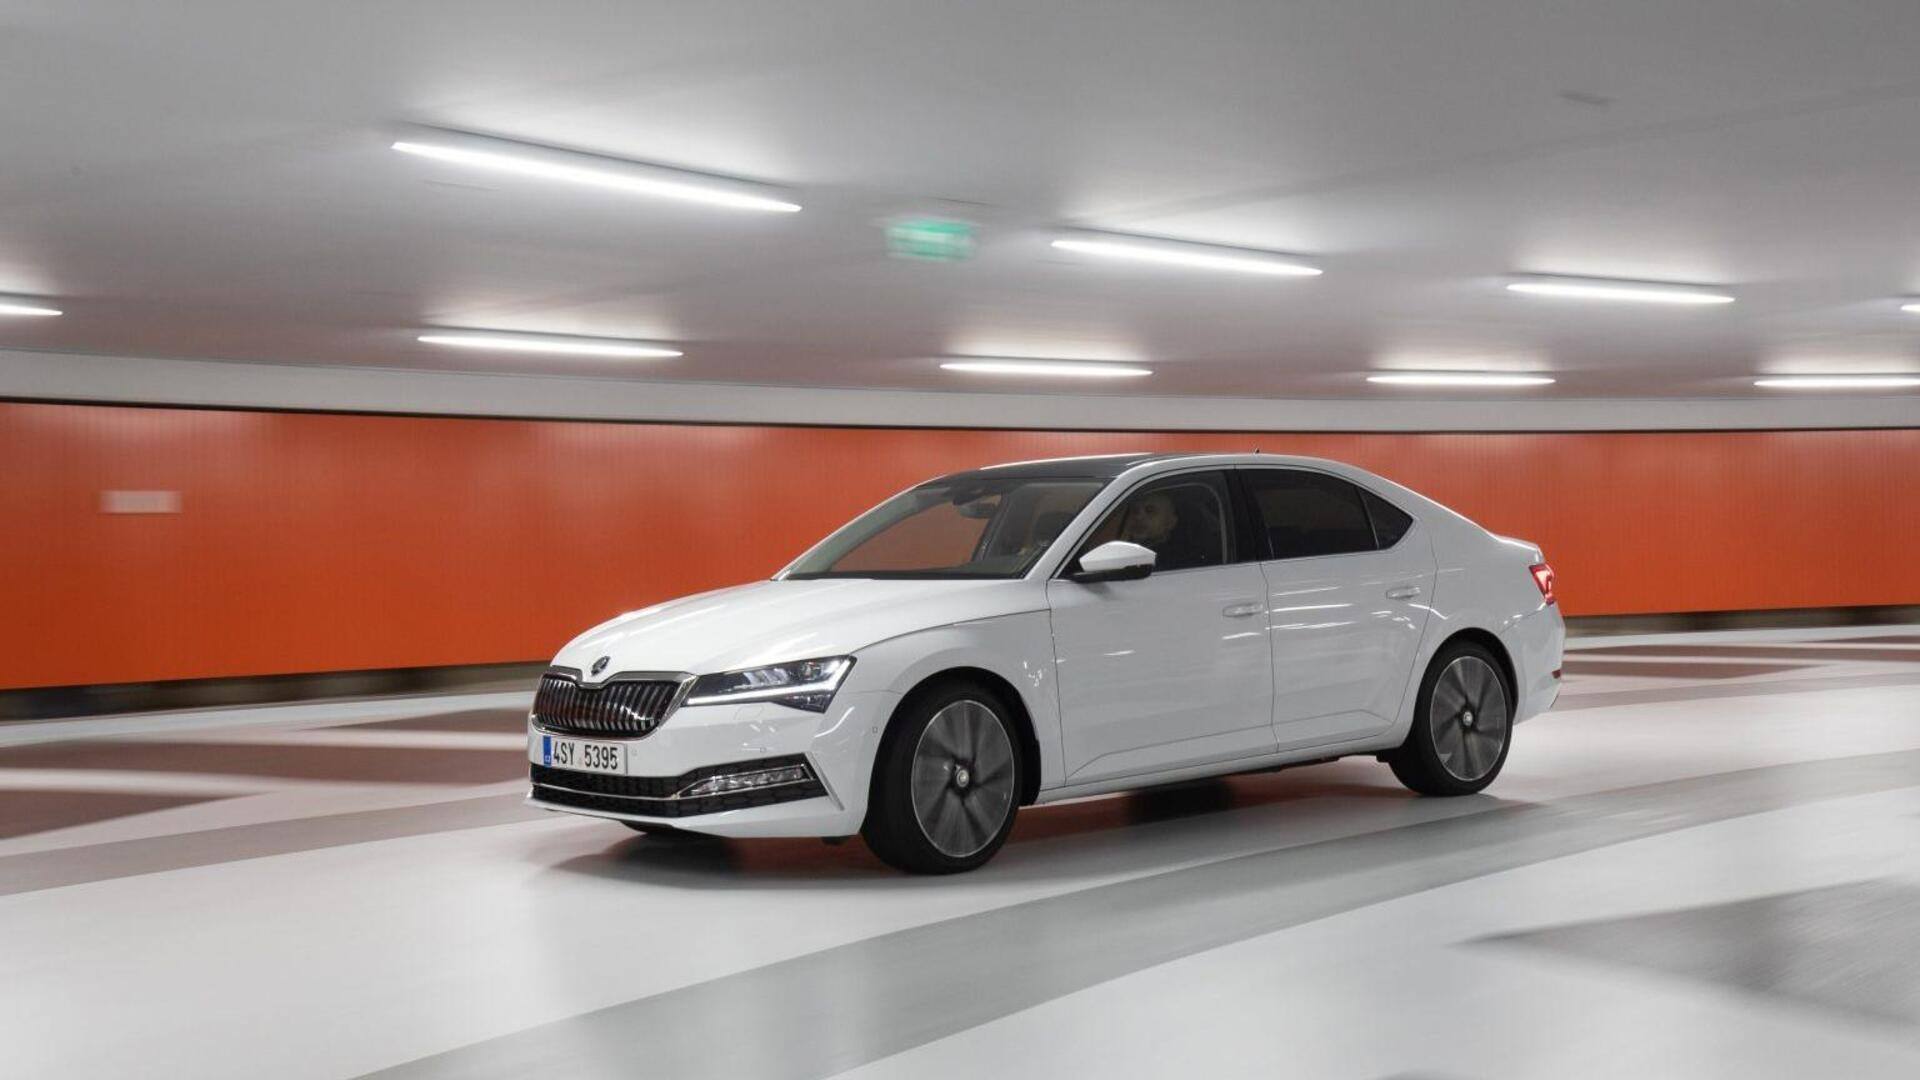 SKODA SUPERB to make a comeback with ADAS functions soon